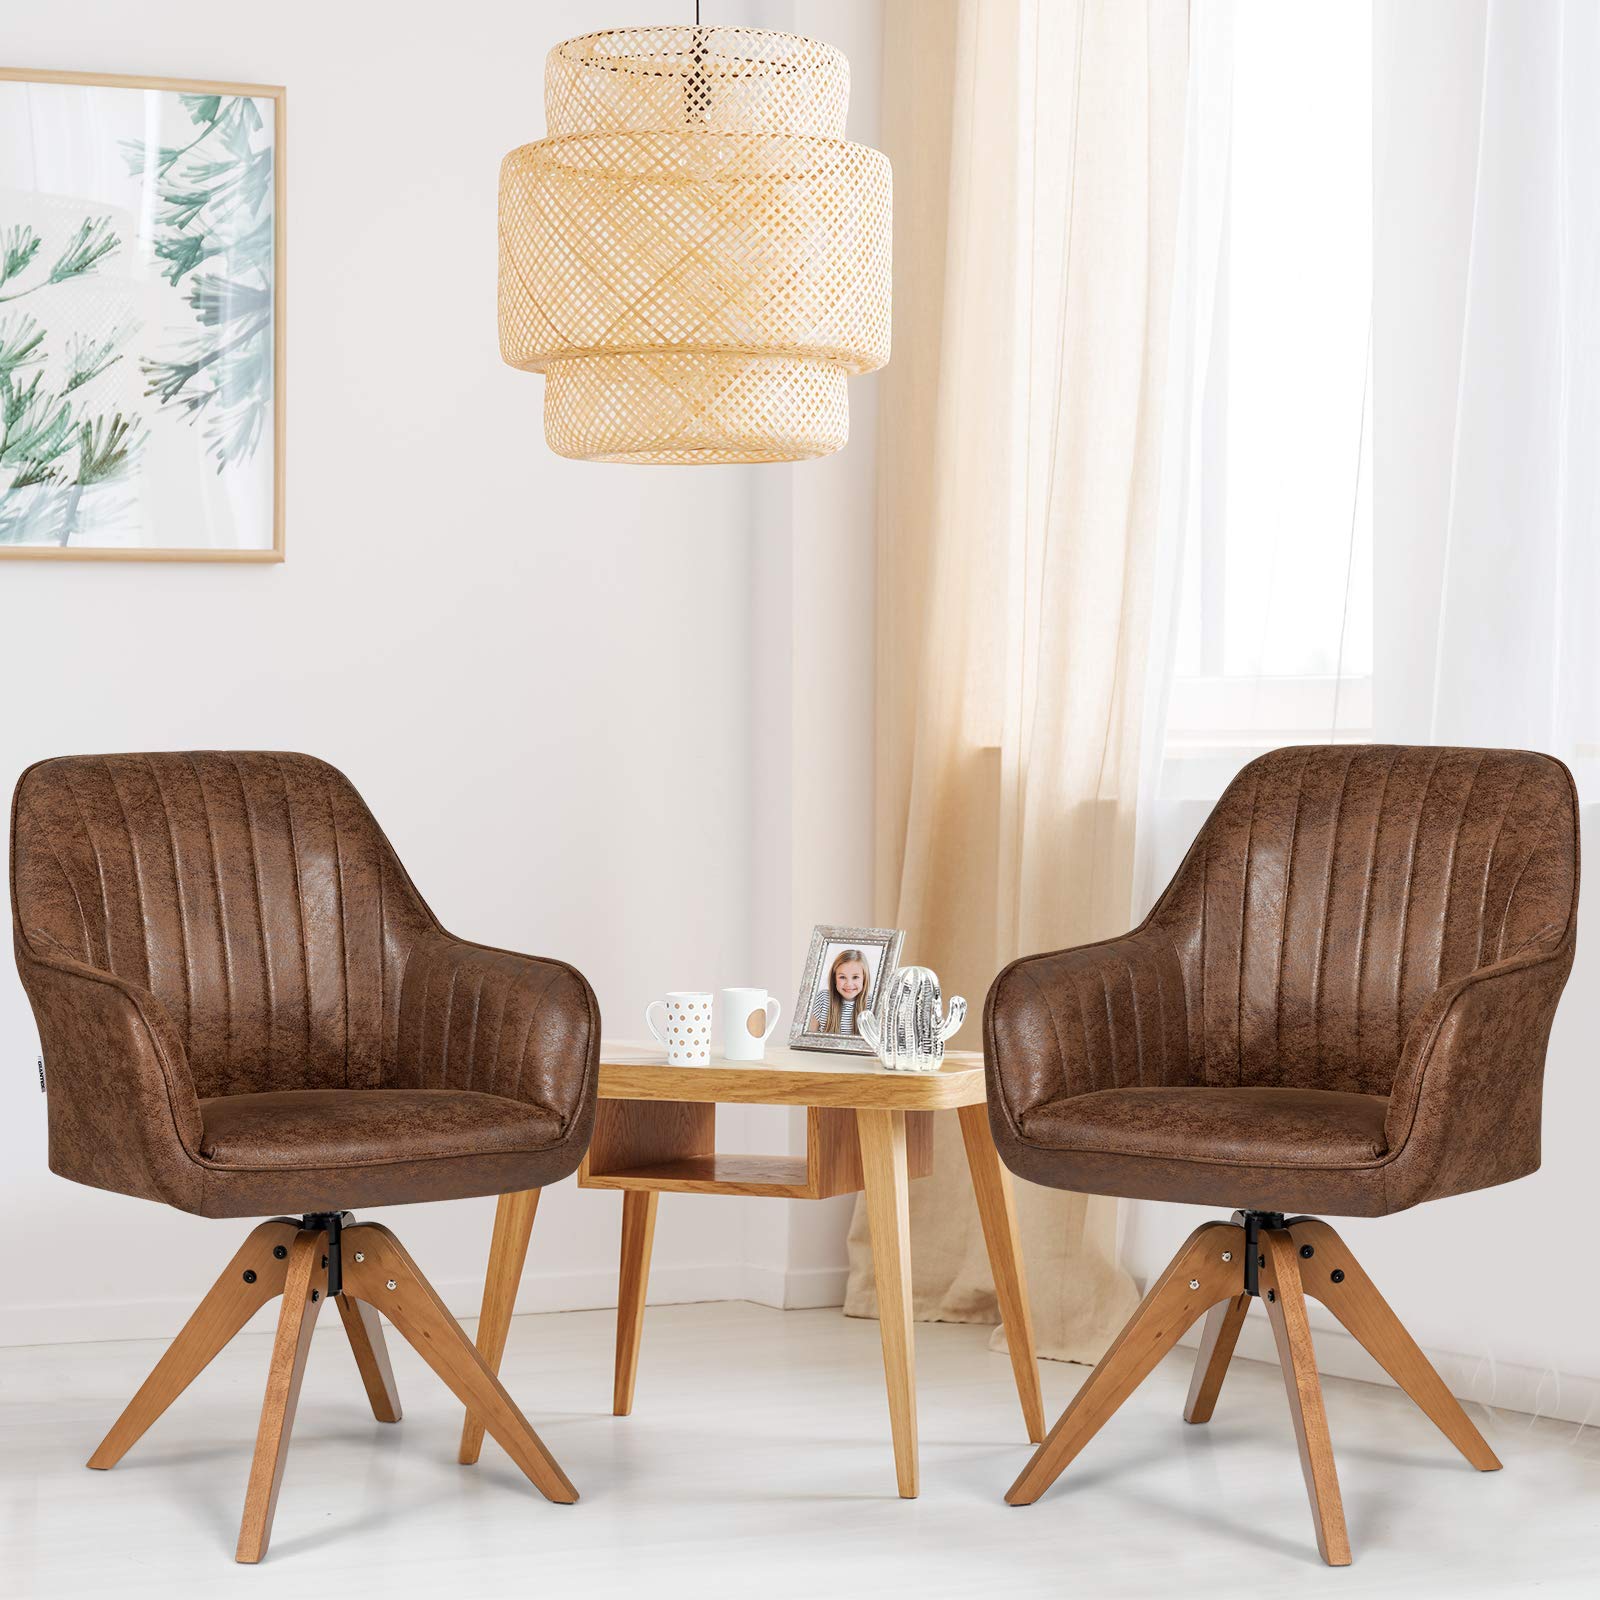 Modern Dining Armchair, No Wheels but Swivel, Solid Wood Legs, Thick Felt Foot Pads